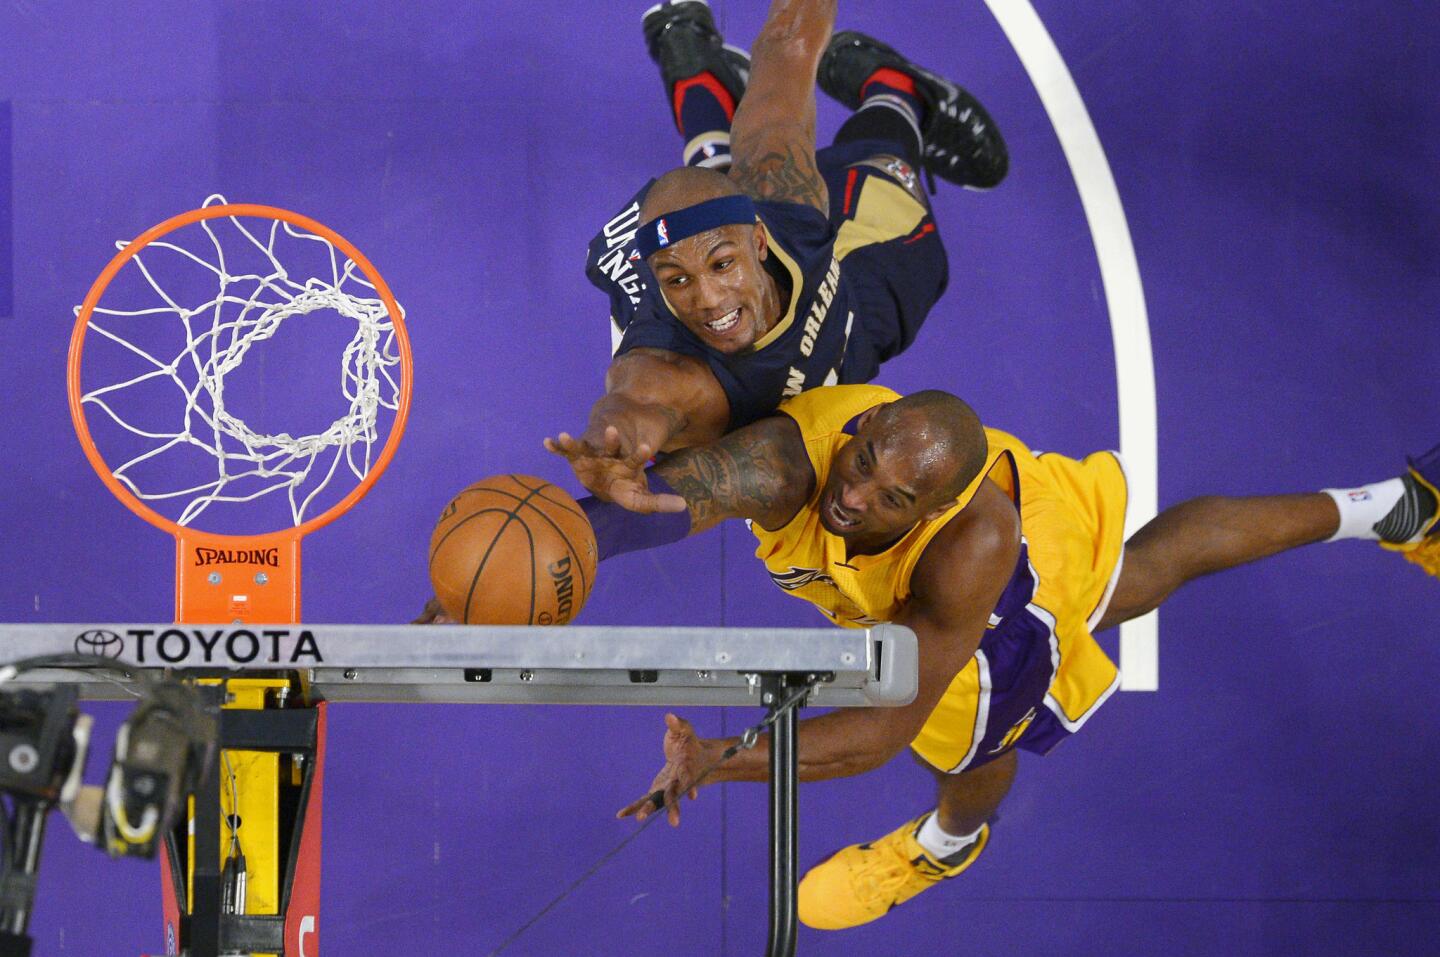 Lakers forward Kobe Bryant, right, shoots as Pelicans forward Dante Cunningham defends during the first half.